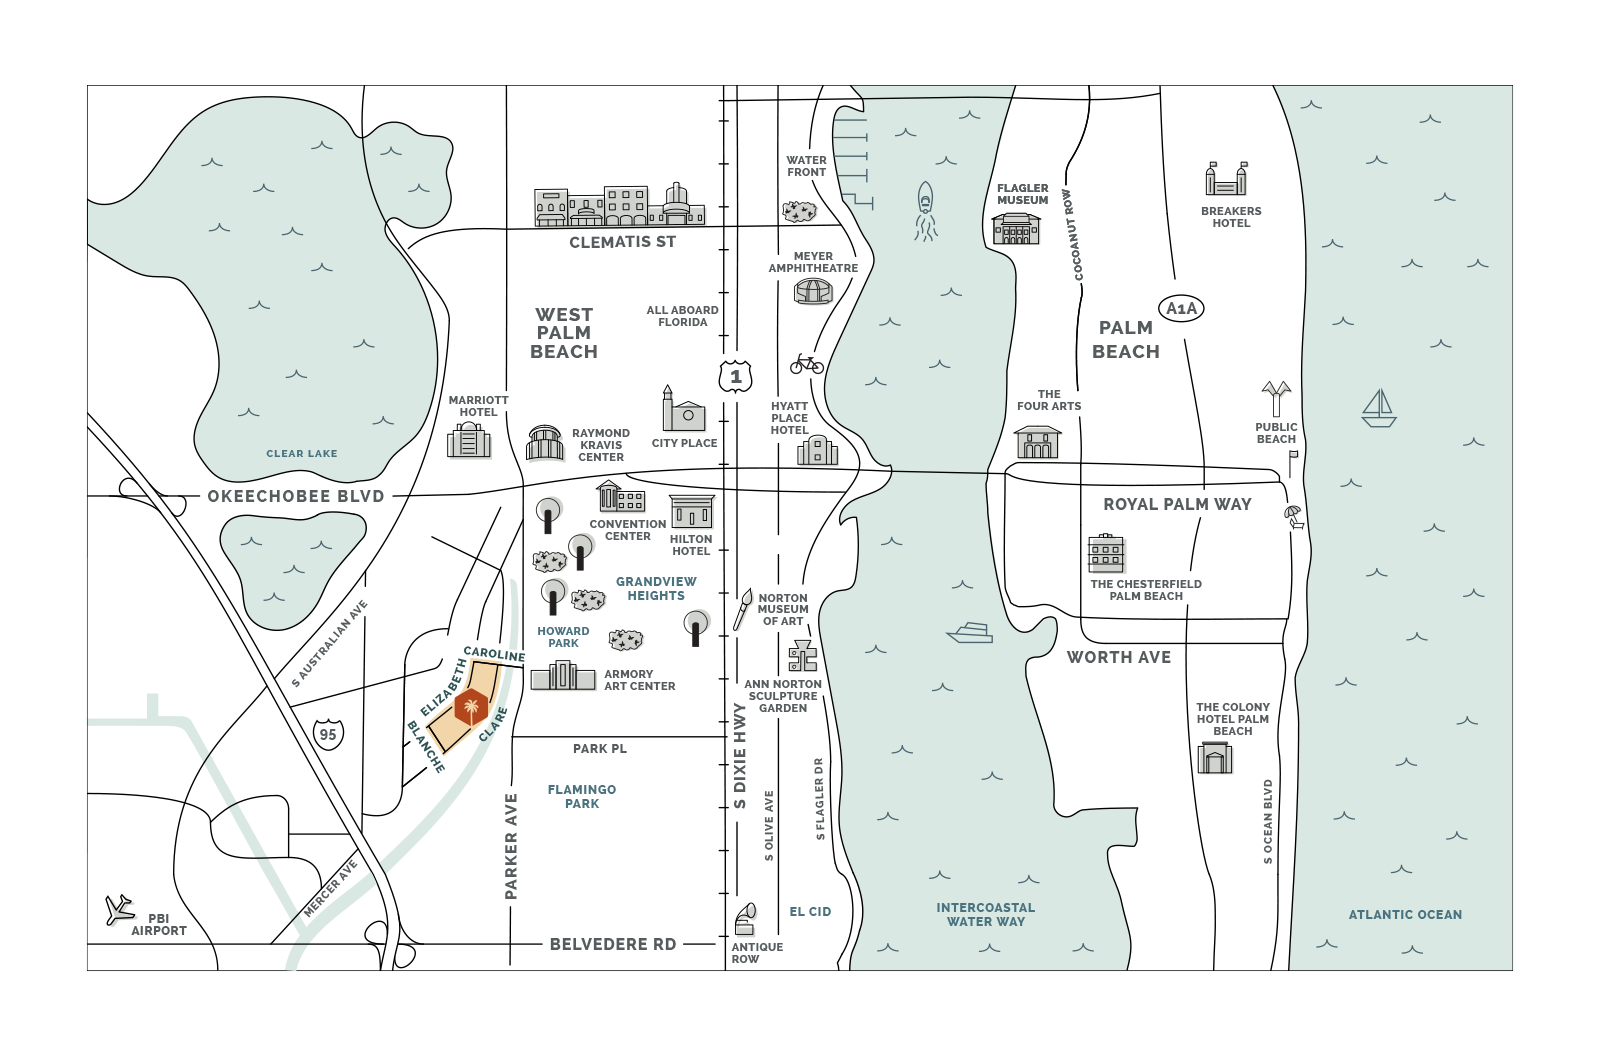 Illustrative map of West Palm Beach with a custom illustrative vector icons of local attractions, and a bright orange seal pinpointing the location of the Warehouse District